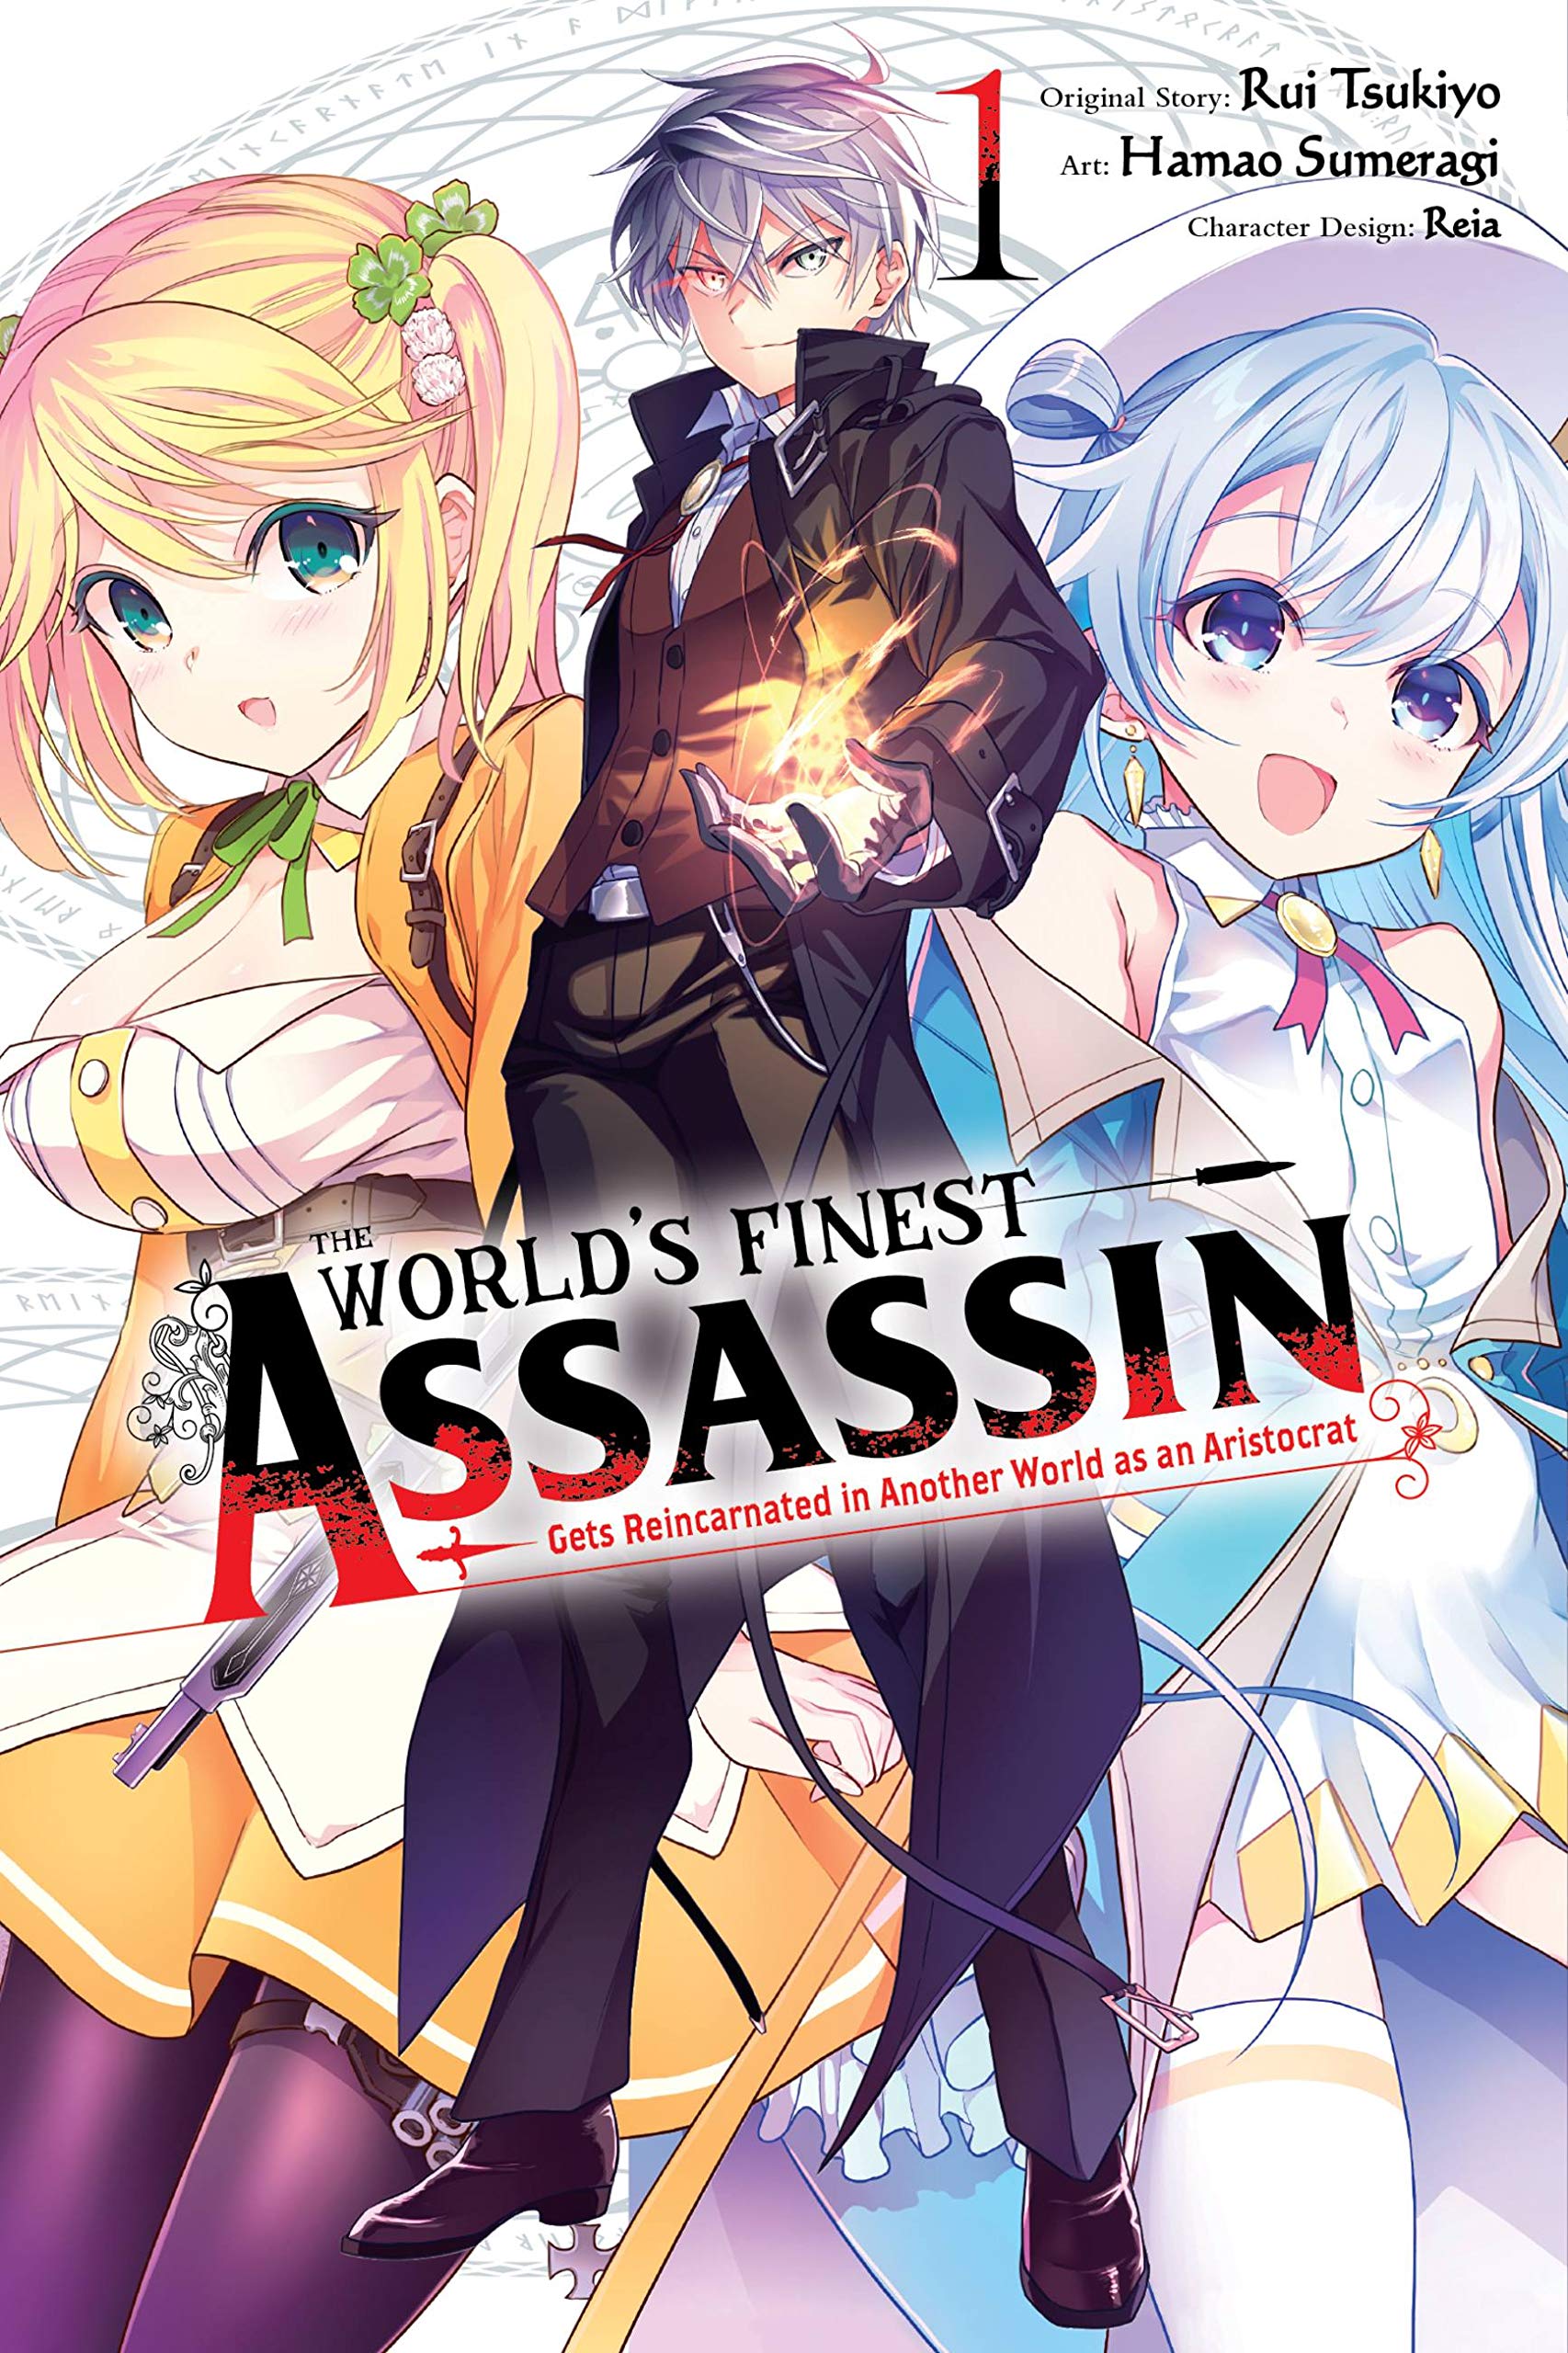 Amazon.com: The World's Finest Assassin Gets Reincarnated in Another World  as an Aristocrat, Vol. 3 (light novel) (The World's Finest Assassin Gets  Reincarnated in Another World as an Aristocrat (light novel), 3):